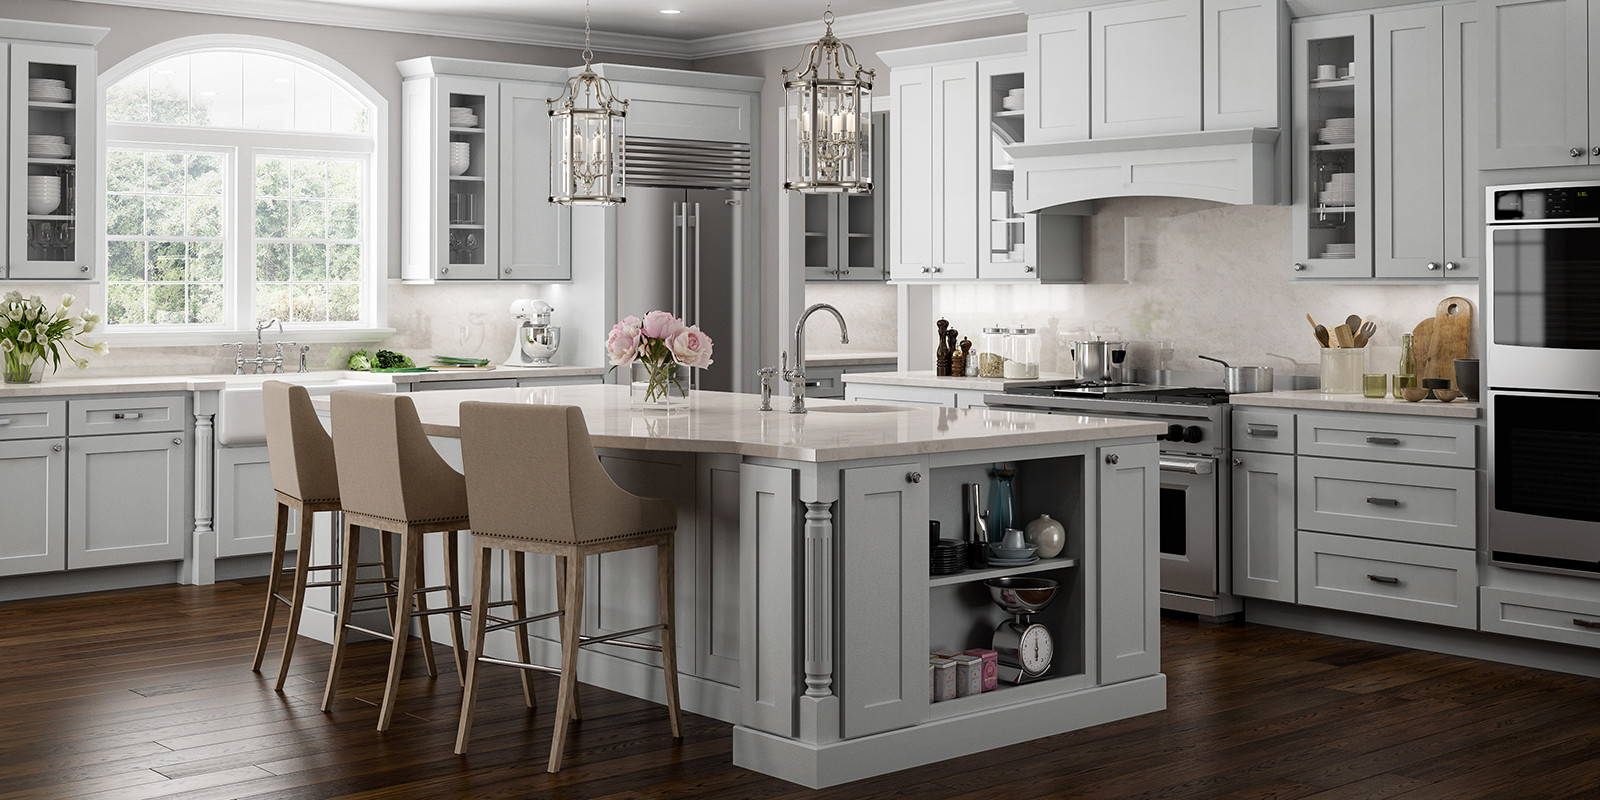 Kitchen And Bathroom Decor
 Dream kitchens and baths start with Humphrey s Kitchen and